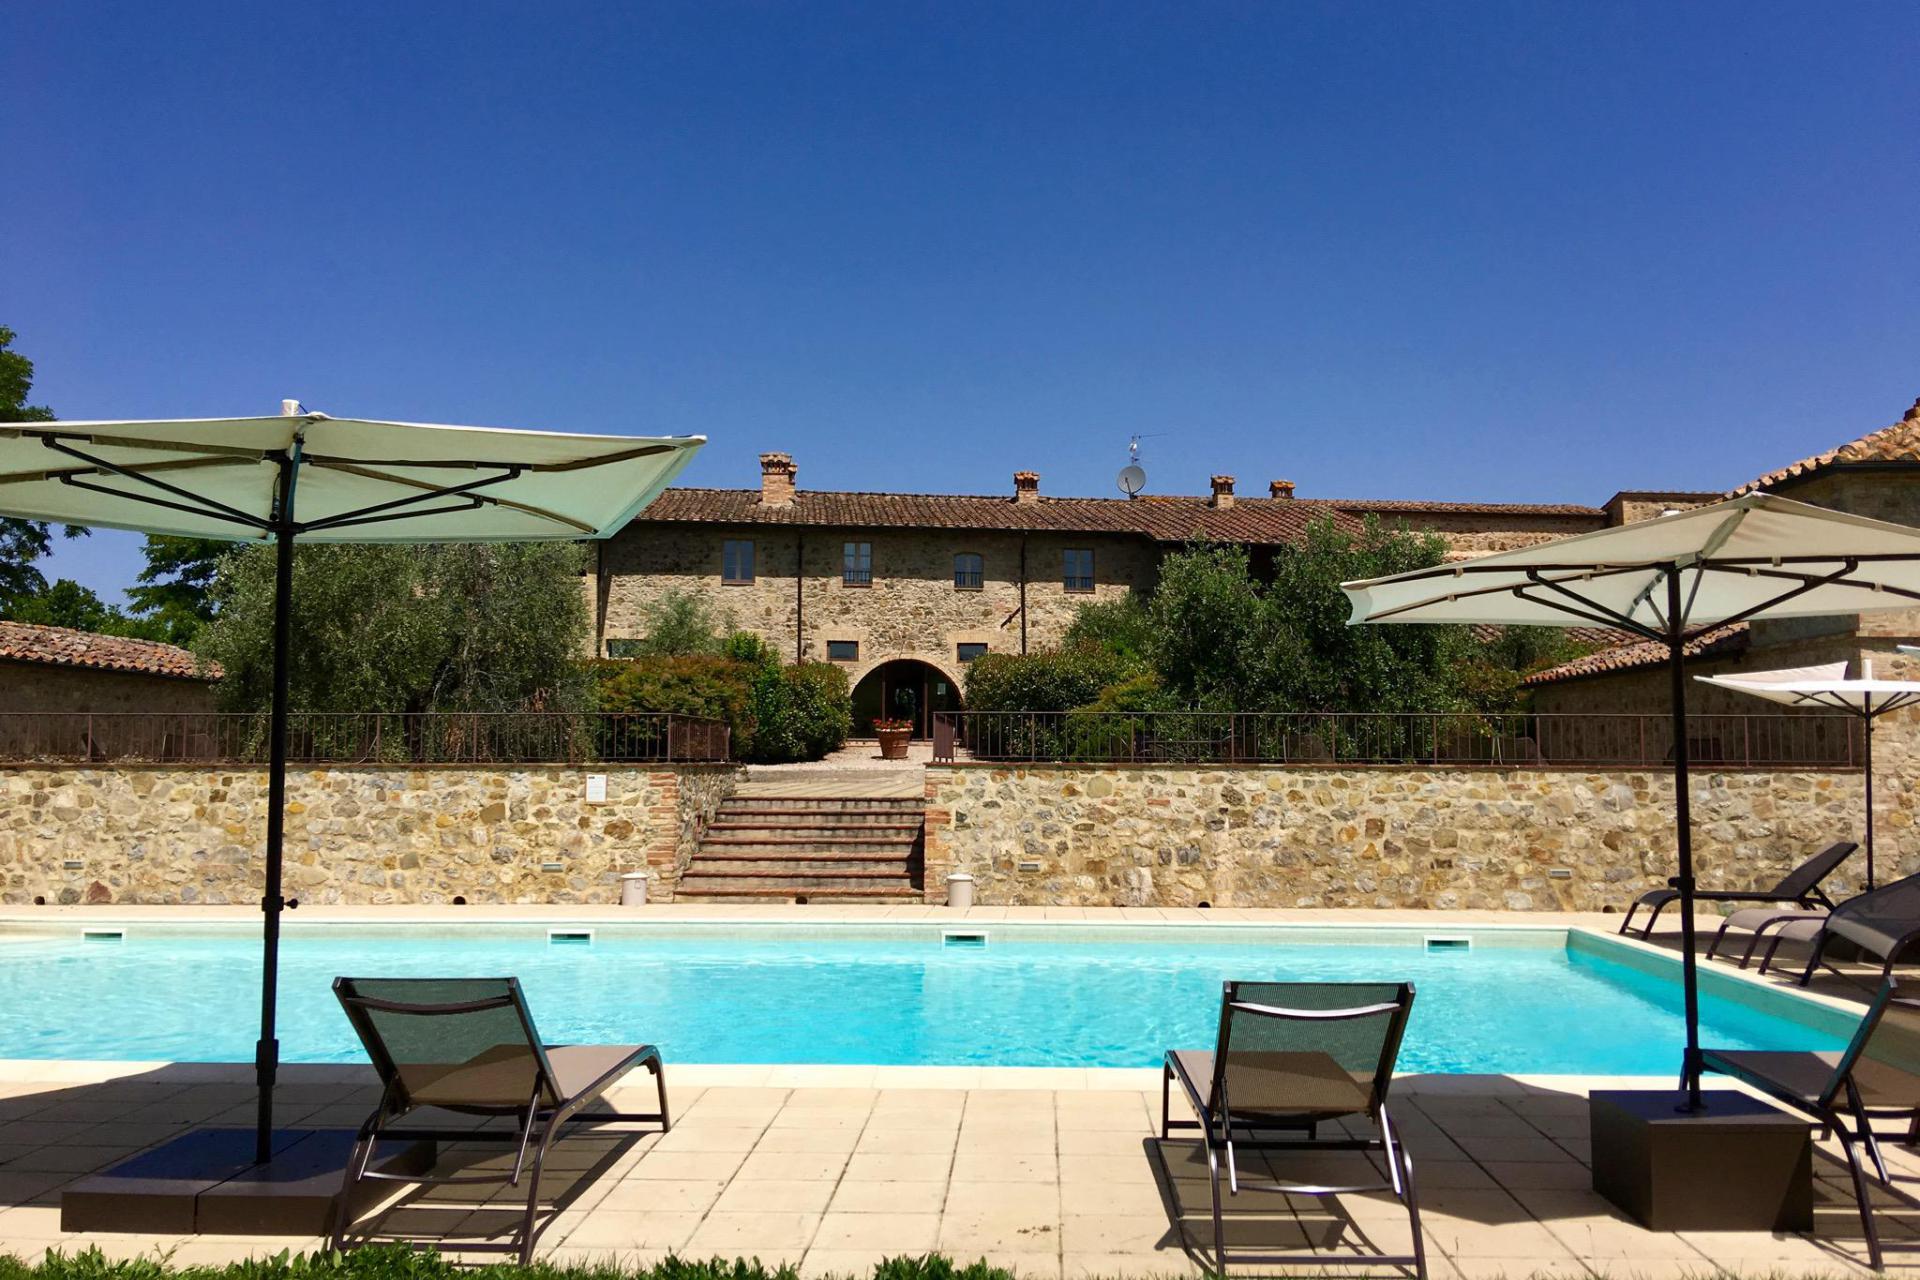 Child-friendly agriturismo centrally located in Tuscany